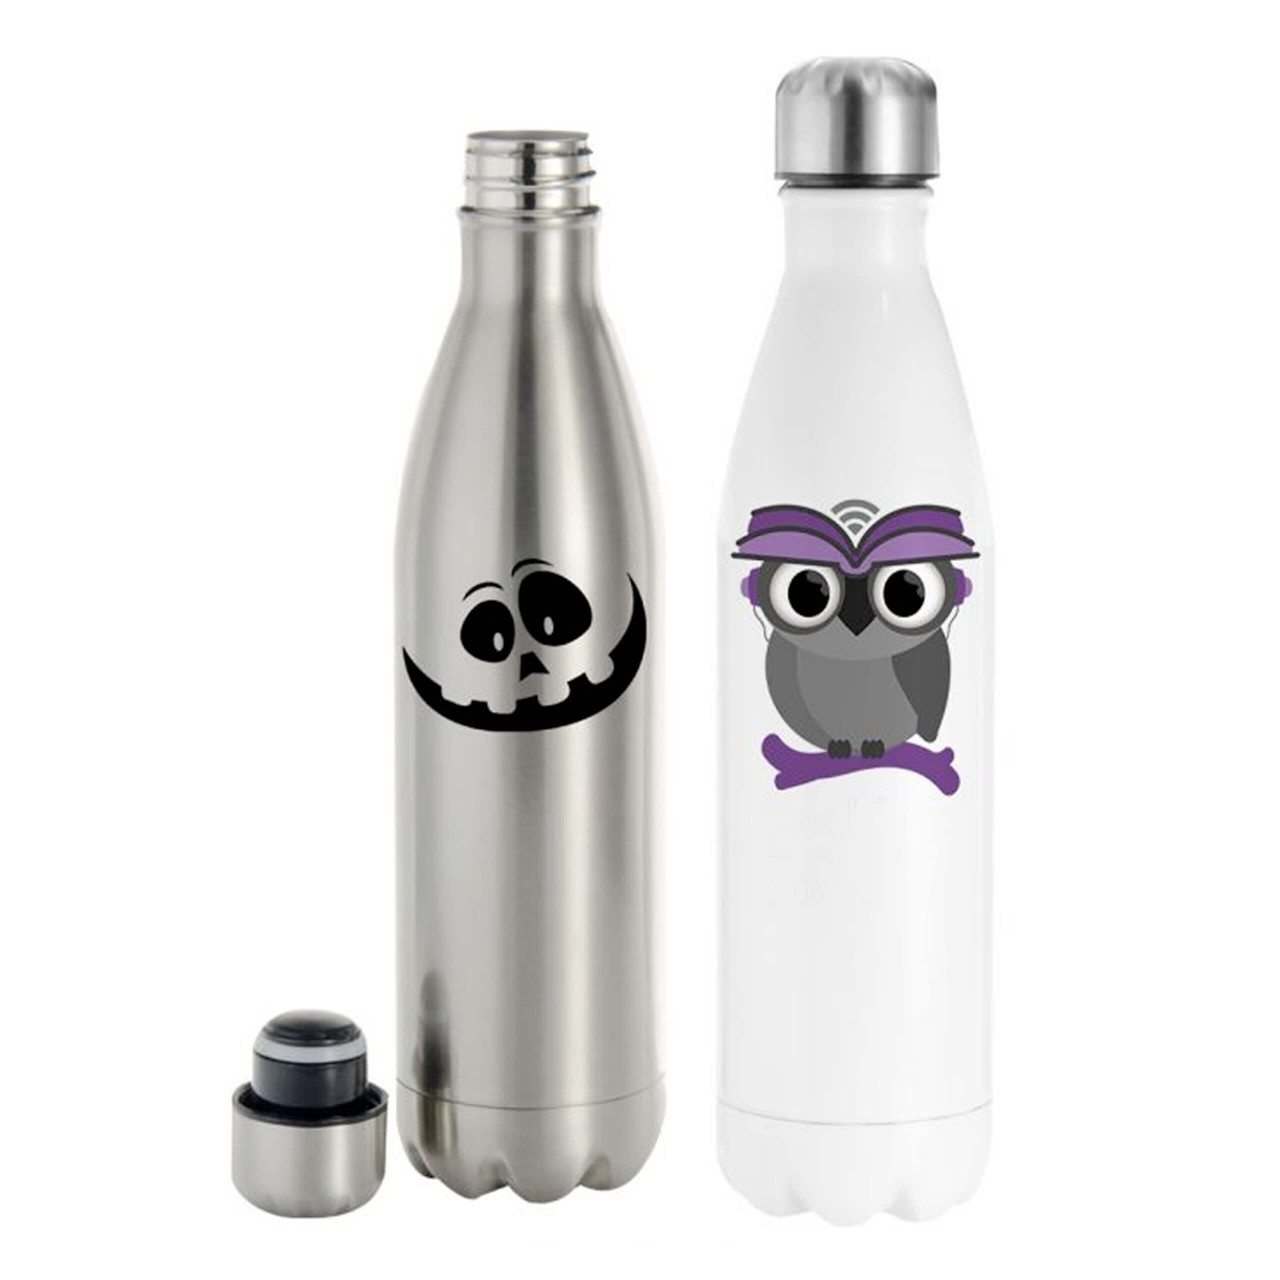 https://cdn11.bigcommerce.com/s-stdtga21hq/images/stencil/1280x1280/products/239/601/Joto_17ozStainlessSteelCokeShapedBottle_Group2__21873.1693600591.jpg?c=1